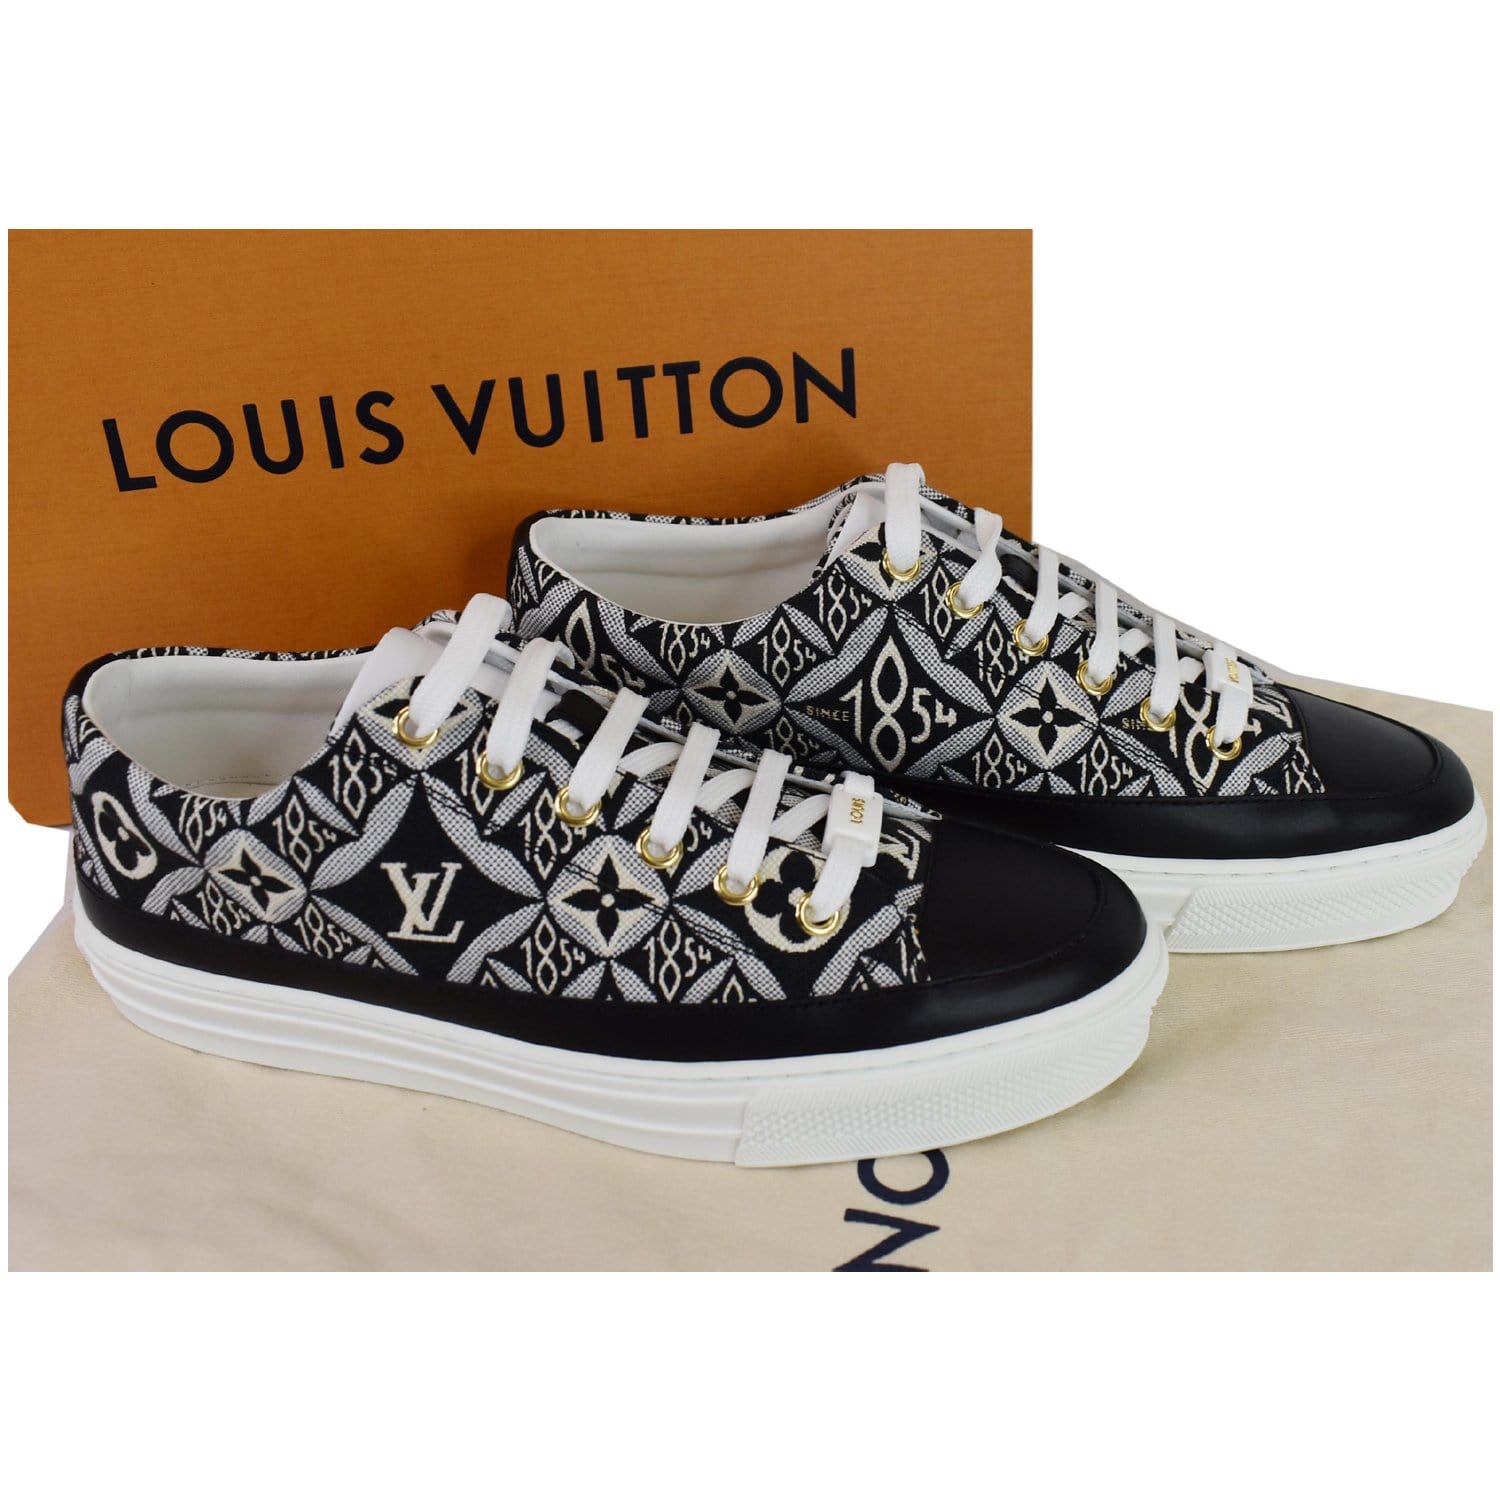 Exclusive Release - In Stock Louis Vuitton Sneakers for Women 2021  Collection LV Stellar Sneaker (1A8NMH) SA PRICE: ₱ 57,895 LV…